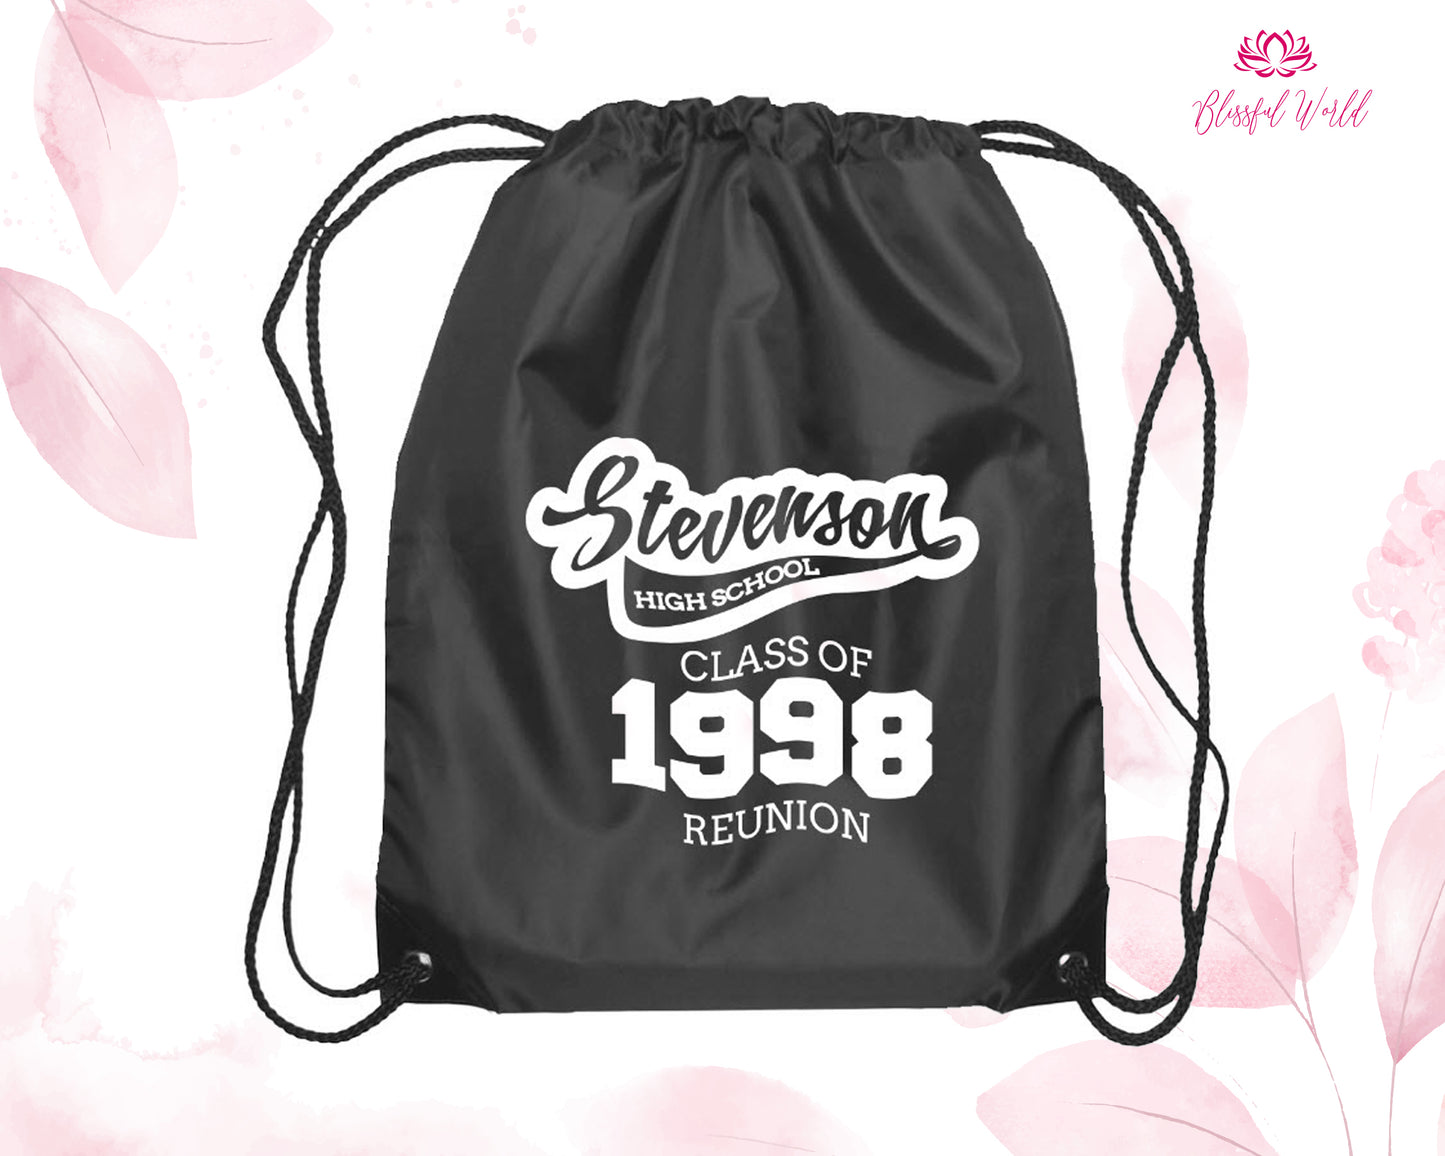 Personalized Name Drawstring Bag Customize Drawstring Custom Gym Drawstring Bag Bridal party Drawstring bag Gift For Her Wedding Gift